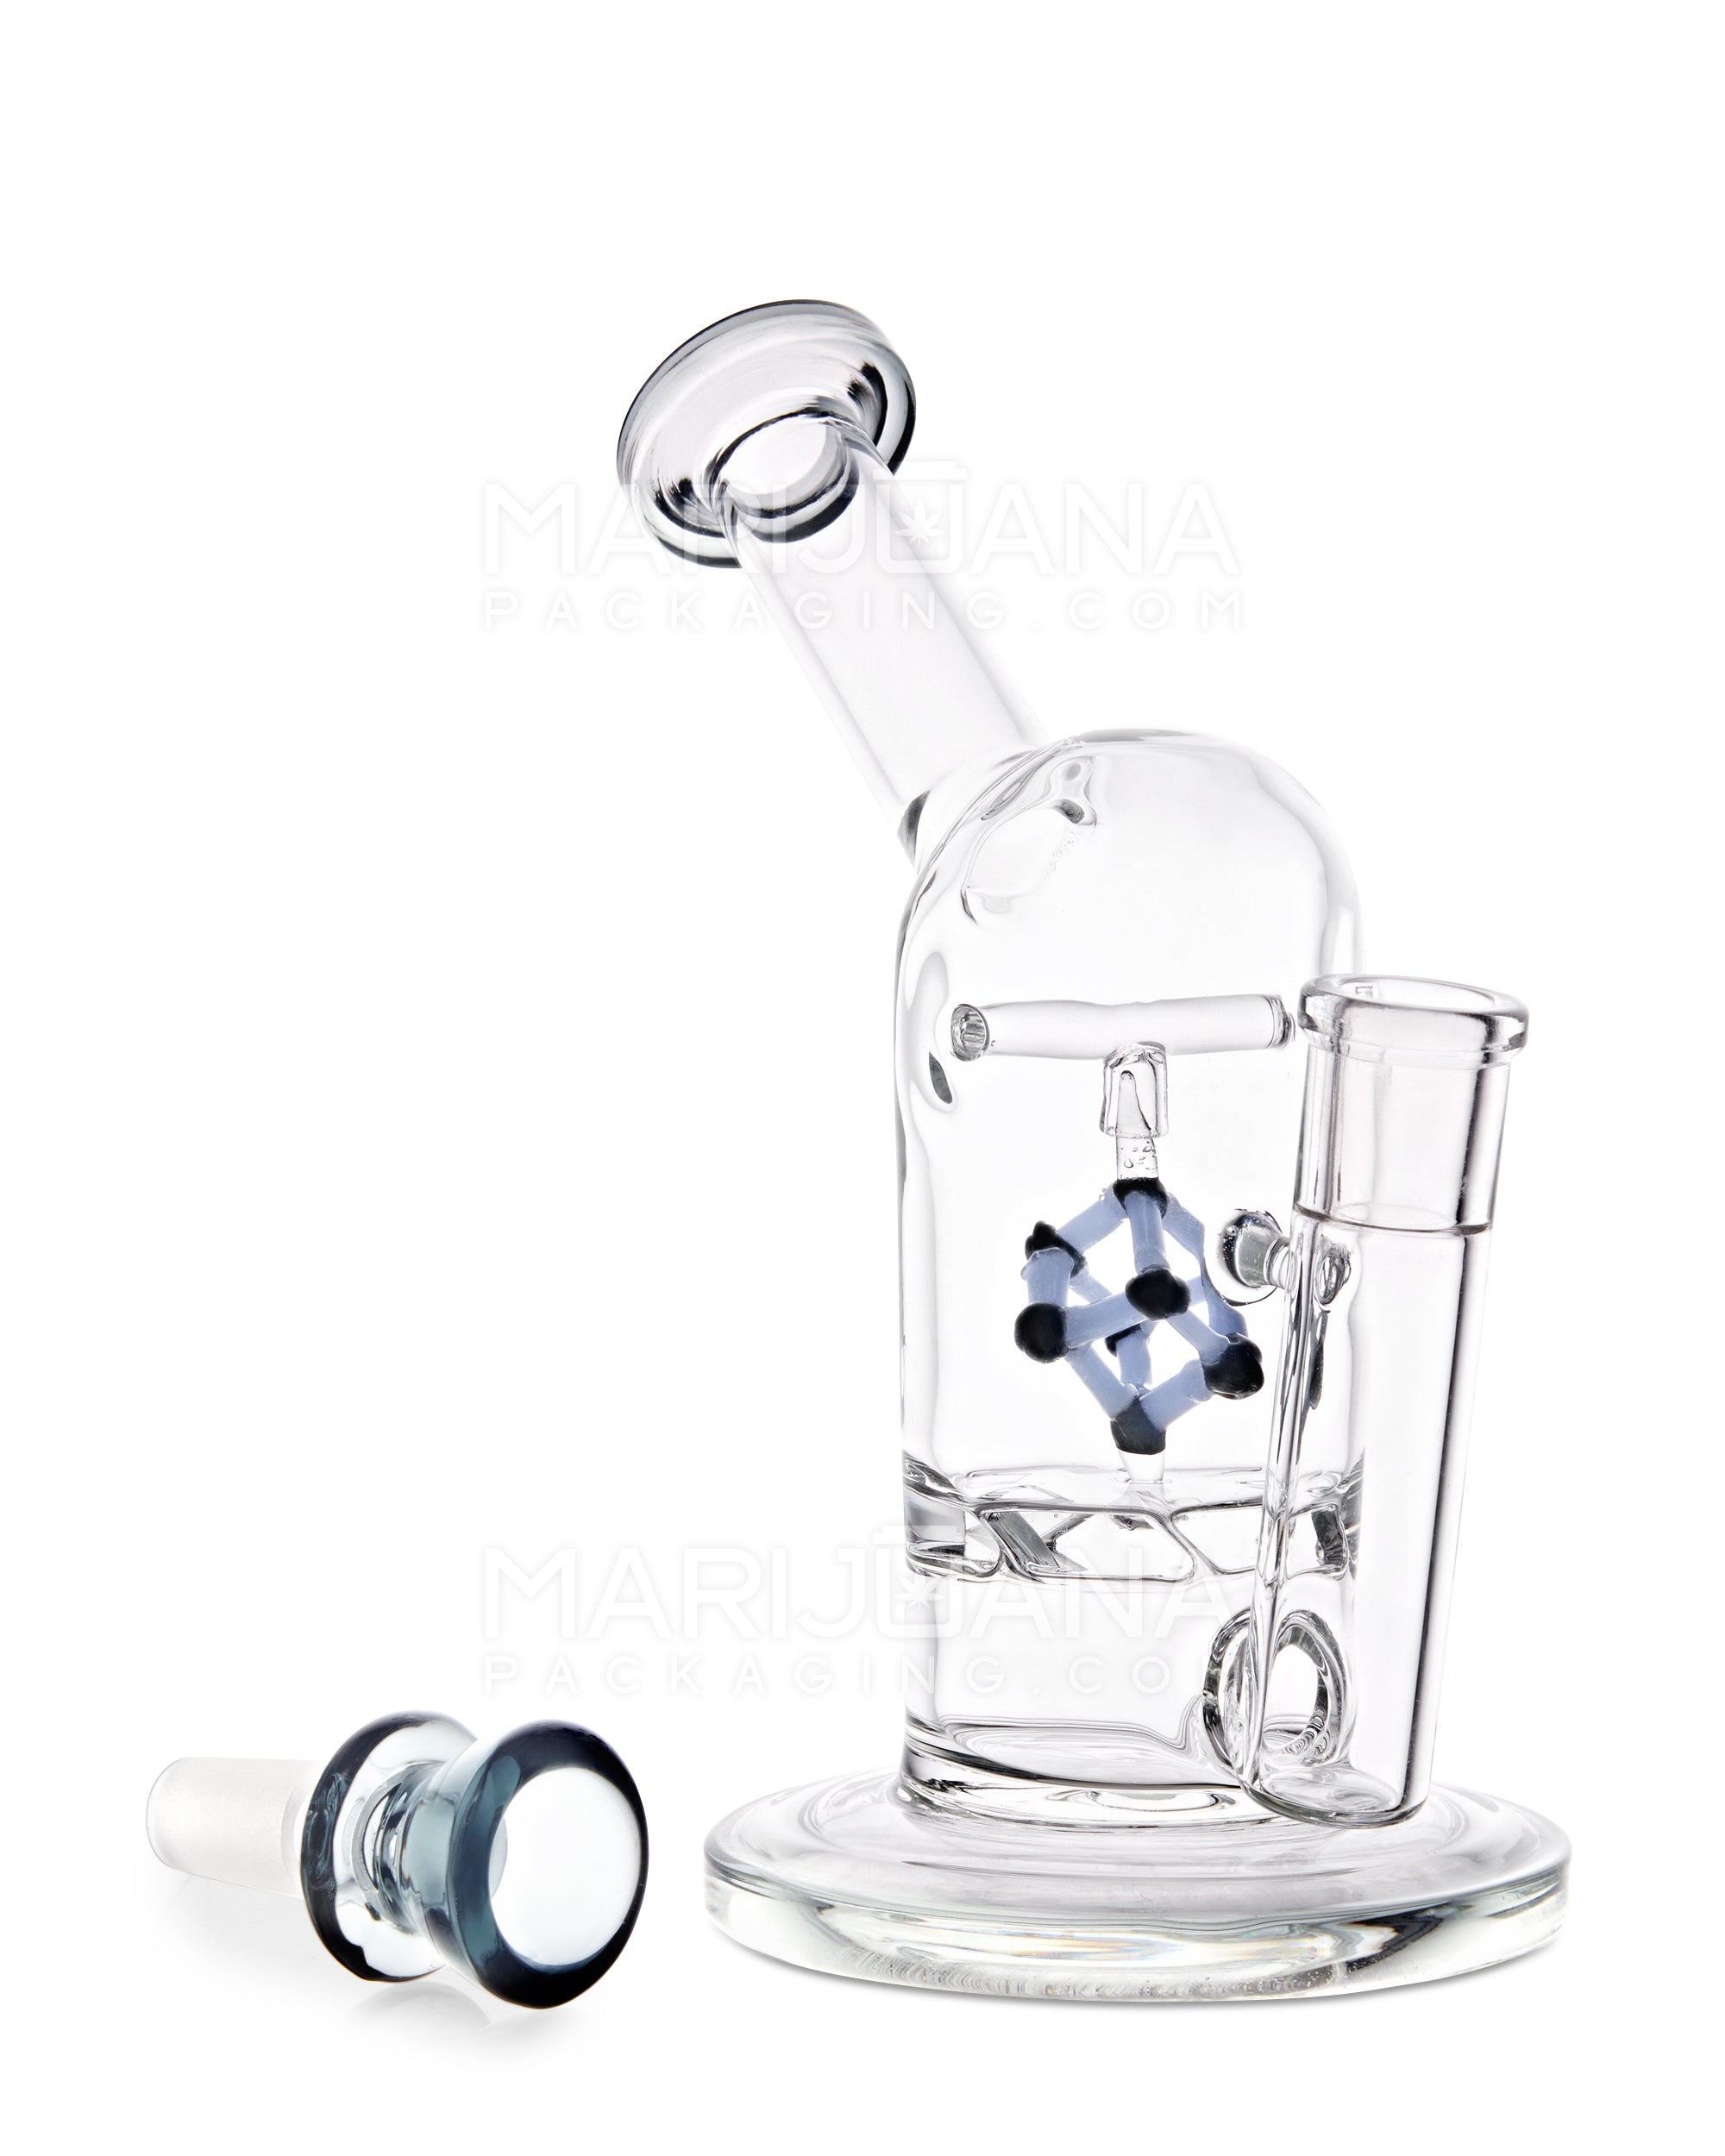 USA Glass | Vortex Perc Glass Water Pipe w/ Spinning Cube | 7in Tall - 14mm Bowl - Smoke